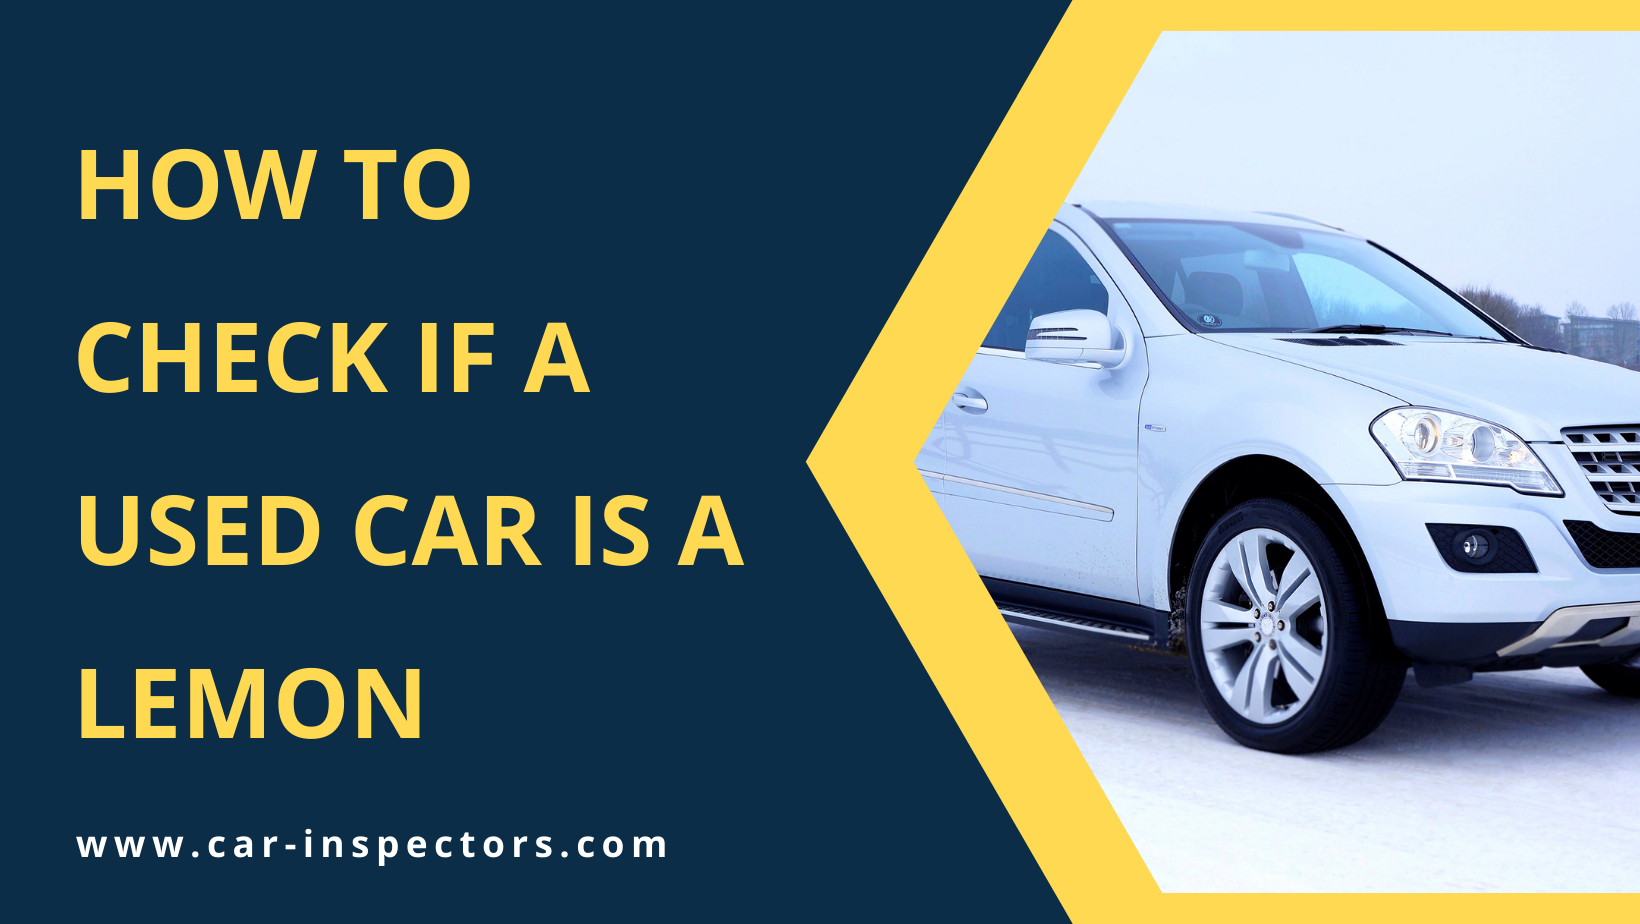 How To Check If A Used Car Is A Lemon